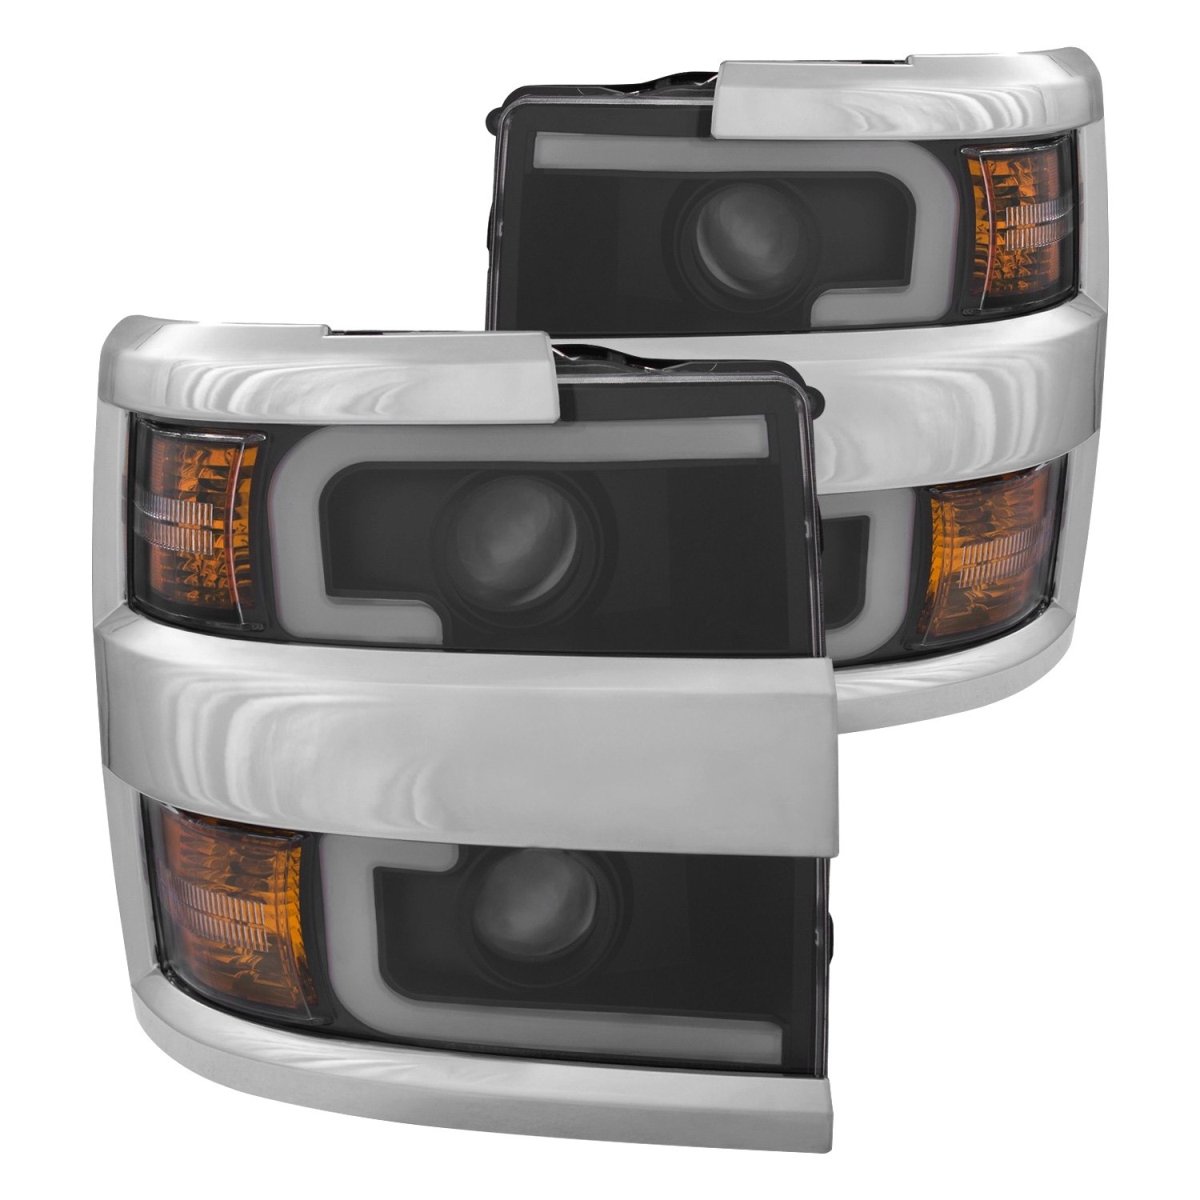 , Usa 111359 15-16 Silverado 25-3500 Hd Projector Headlights With Plank Style Design Black With Amber